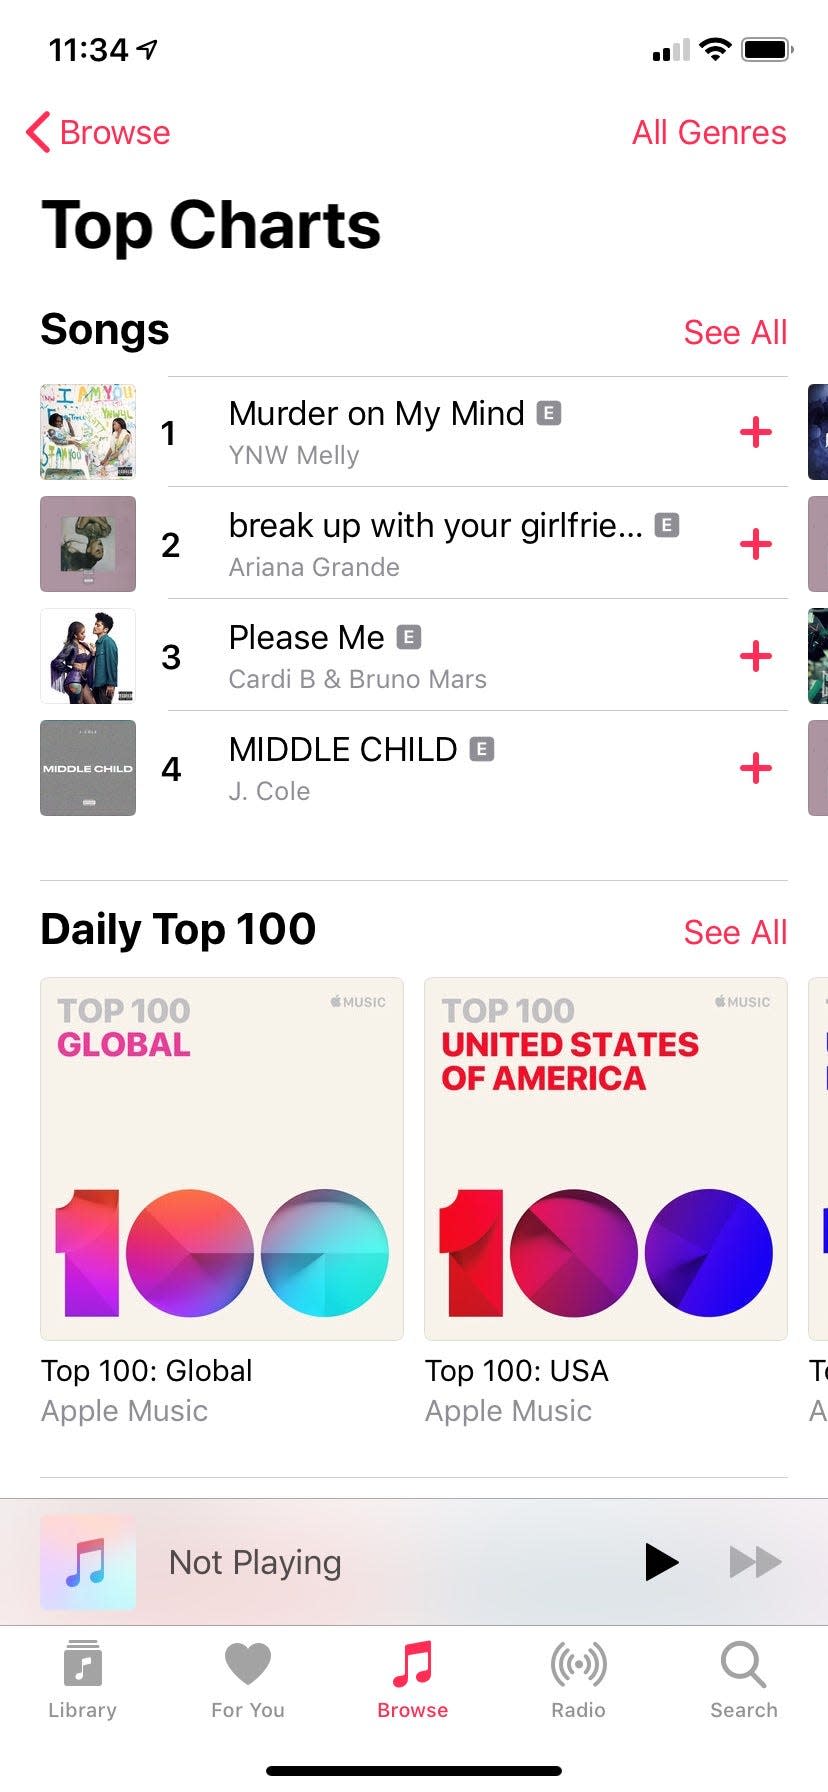 On Feb. 18, 2019, Apple Music listed YNW Melly's “Murder on My Mind” as the top song on its chart followed by songs from Ariana Grande and Cardi B & Bruno Mars.